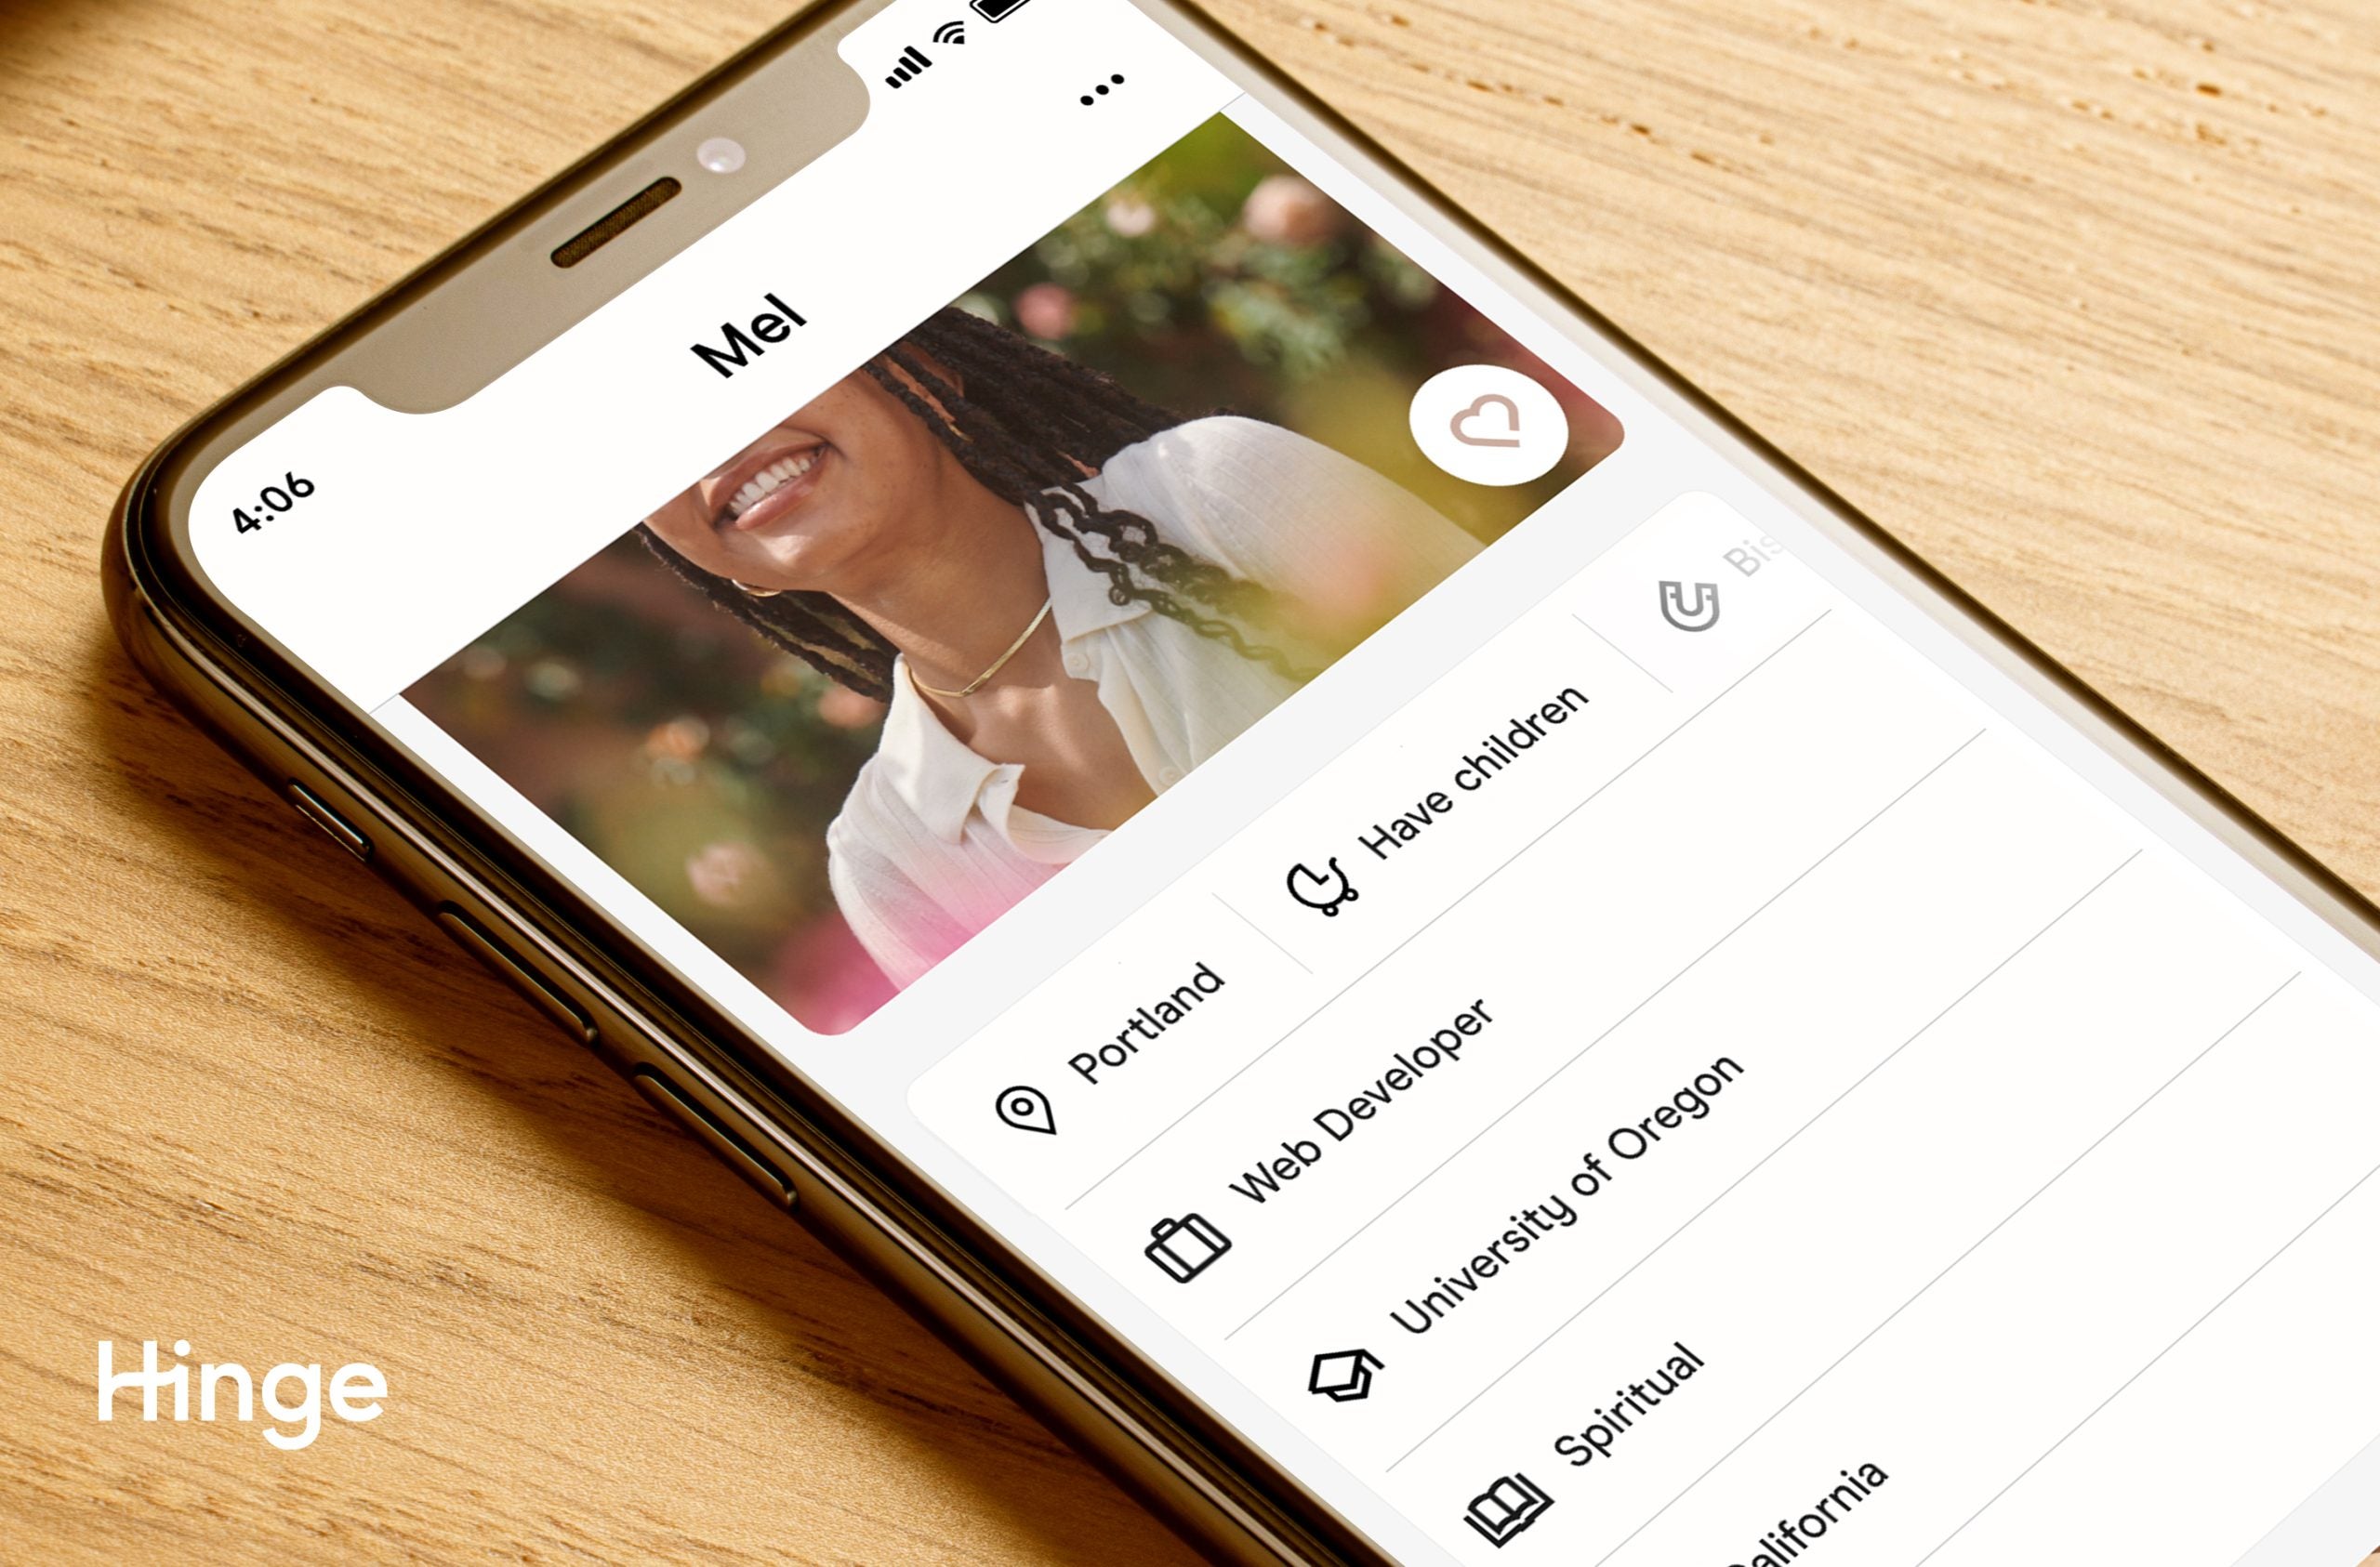 Dating App Hinge To Give Single Parents $100 Child Care Stipend Just In Time For Valentine’s Day